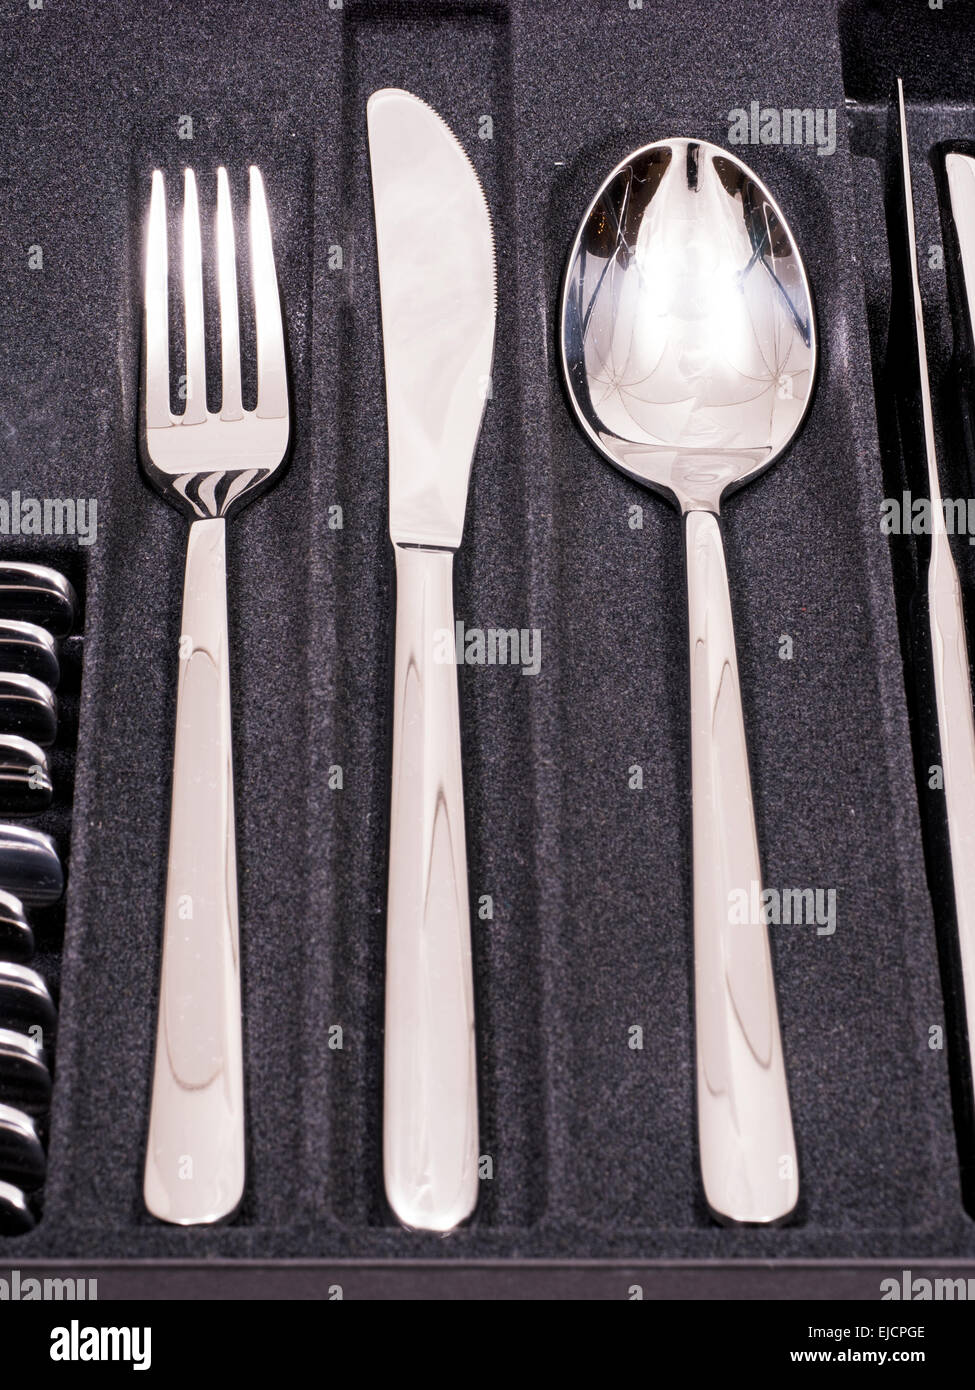 Cutlery Tray with new cutlery Stock Photo